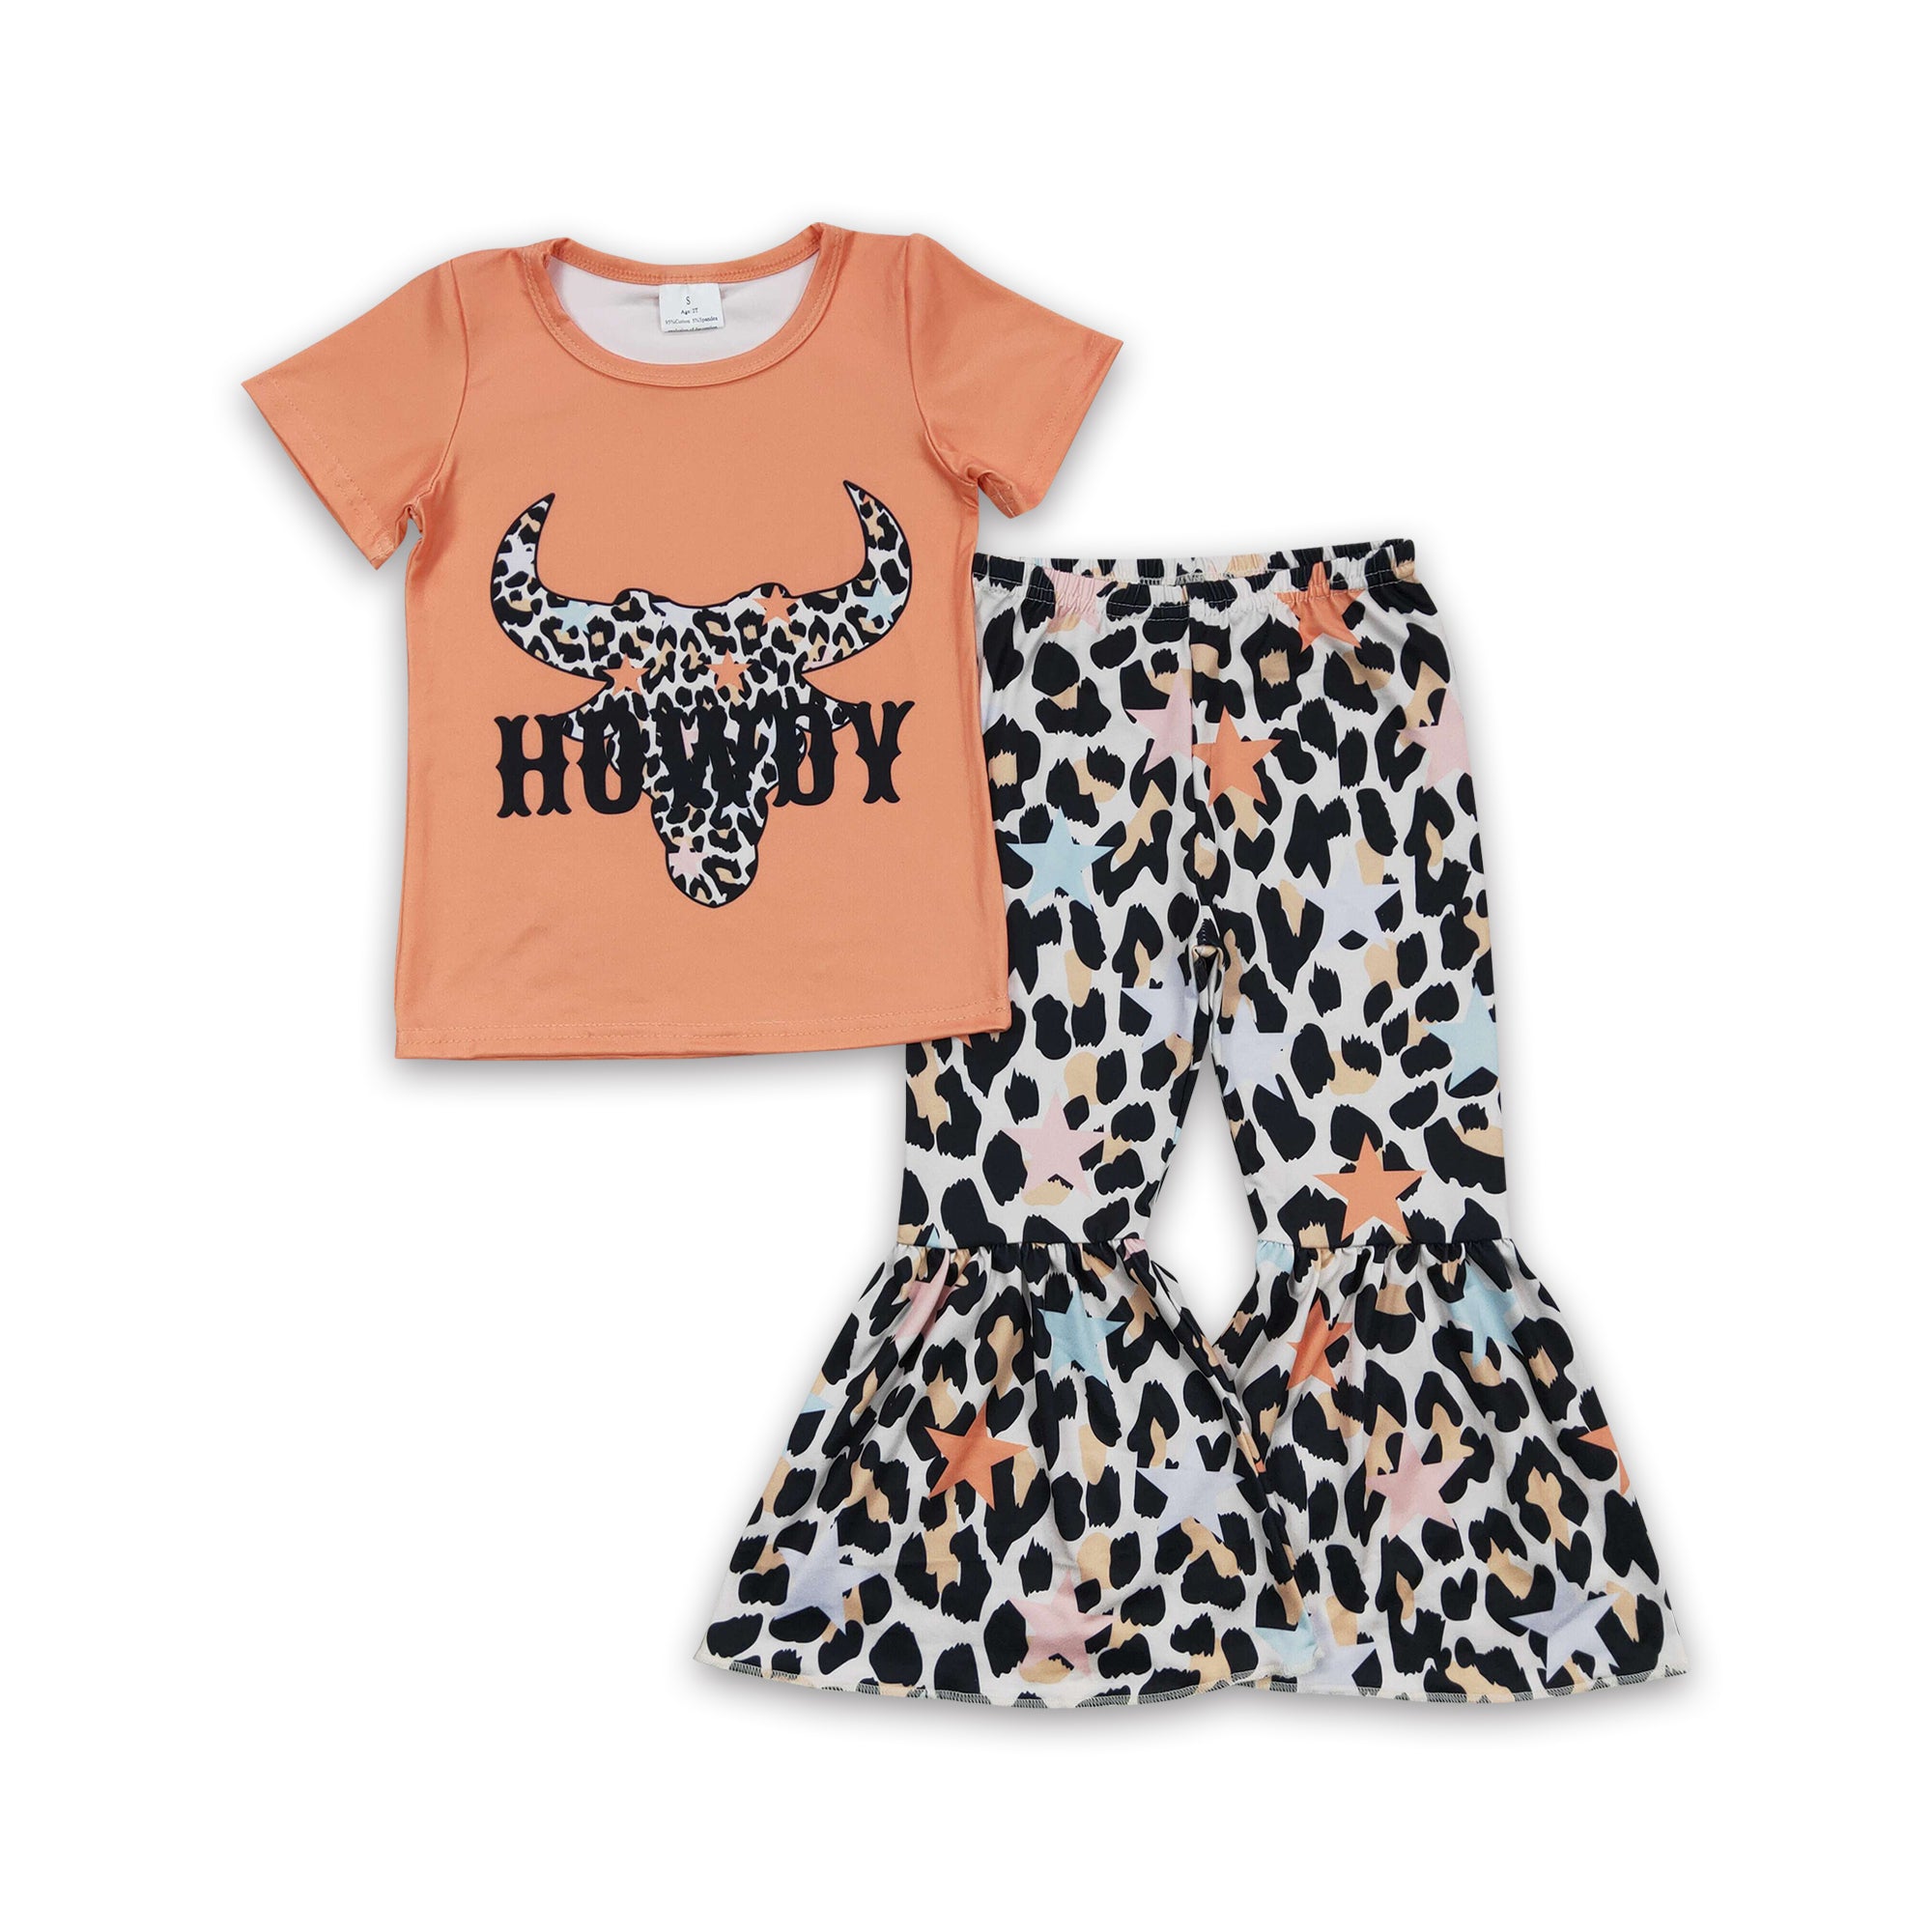 GSPO0305 baby girl clothes howdy fall spring outfits